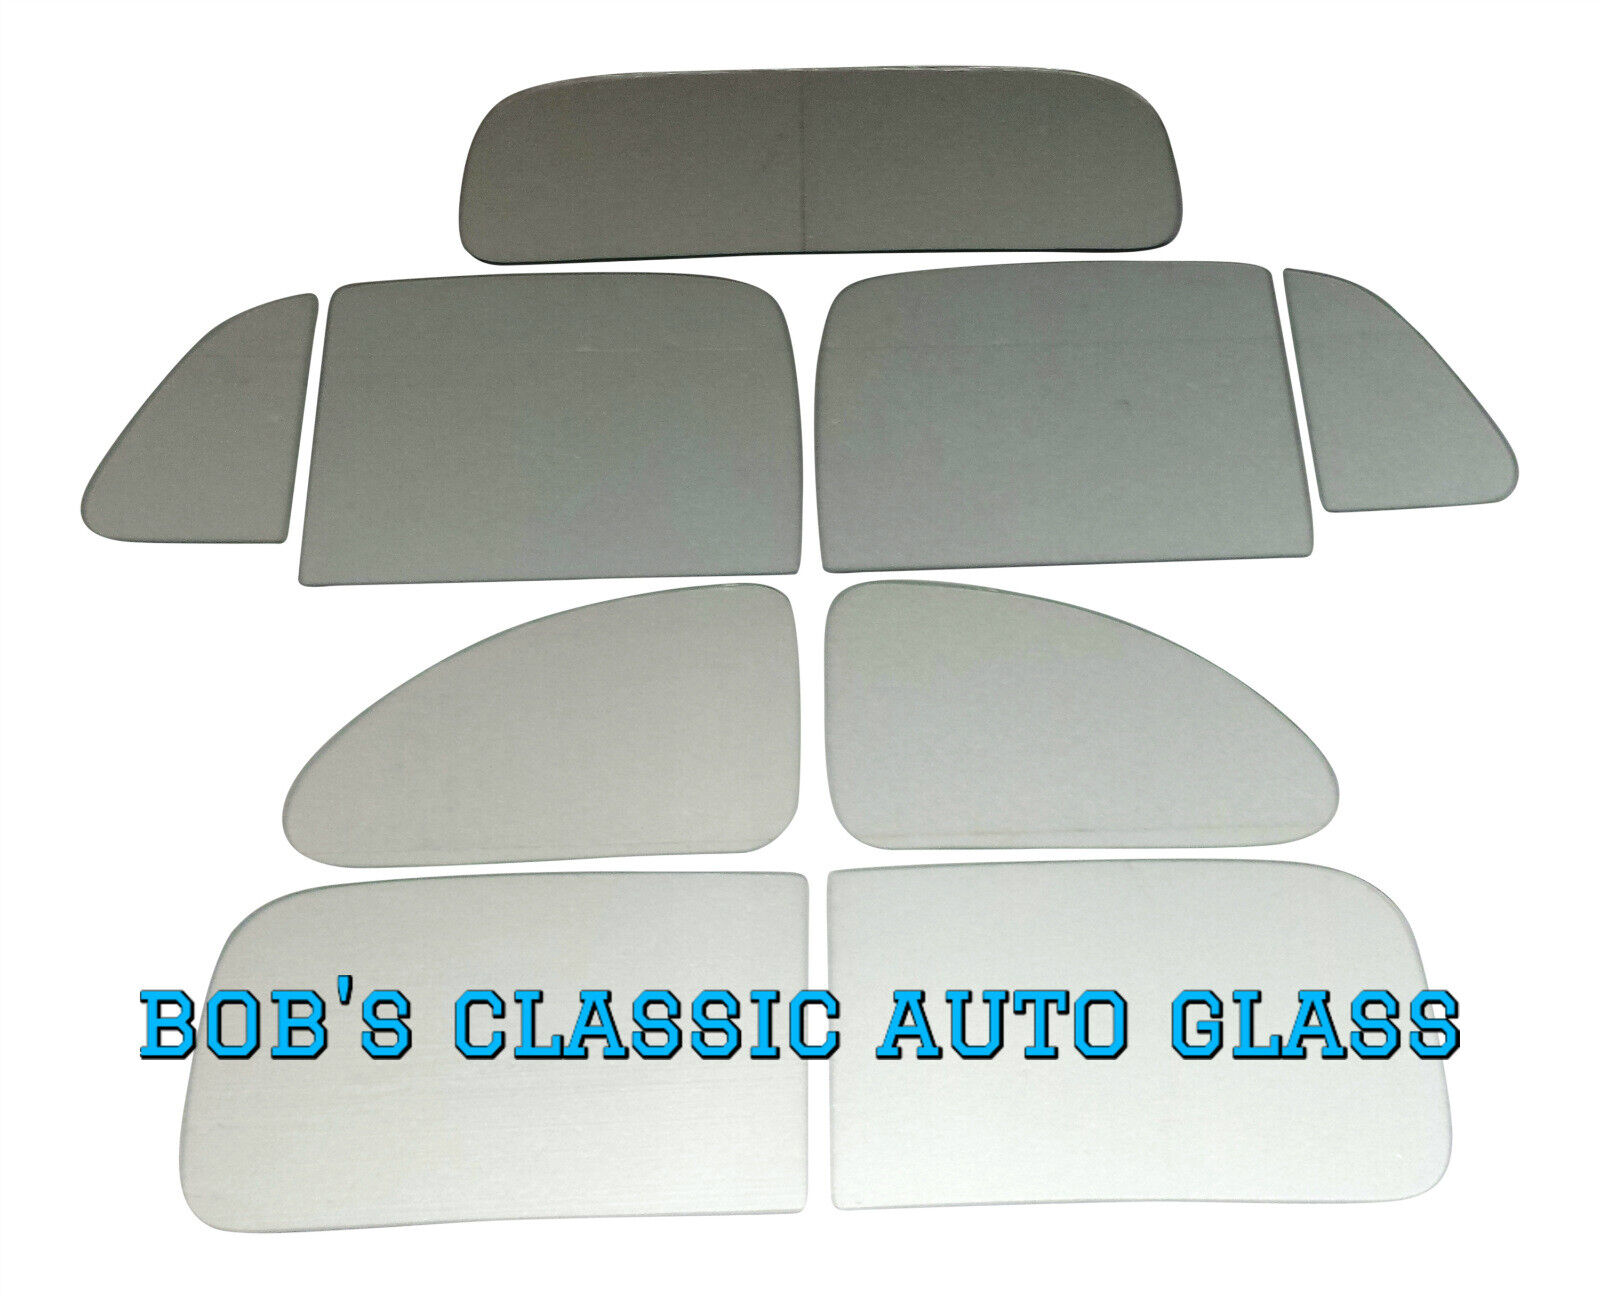 1937 1938 CHEVROLET 5 WINDOW COUPE CLASSIC AUTO GLASS VINTAGE CHEVY NEW FLAT